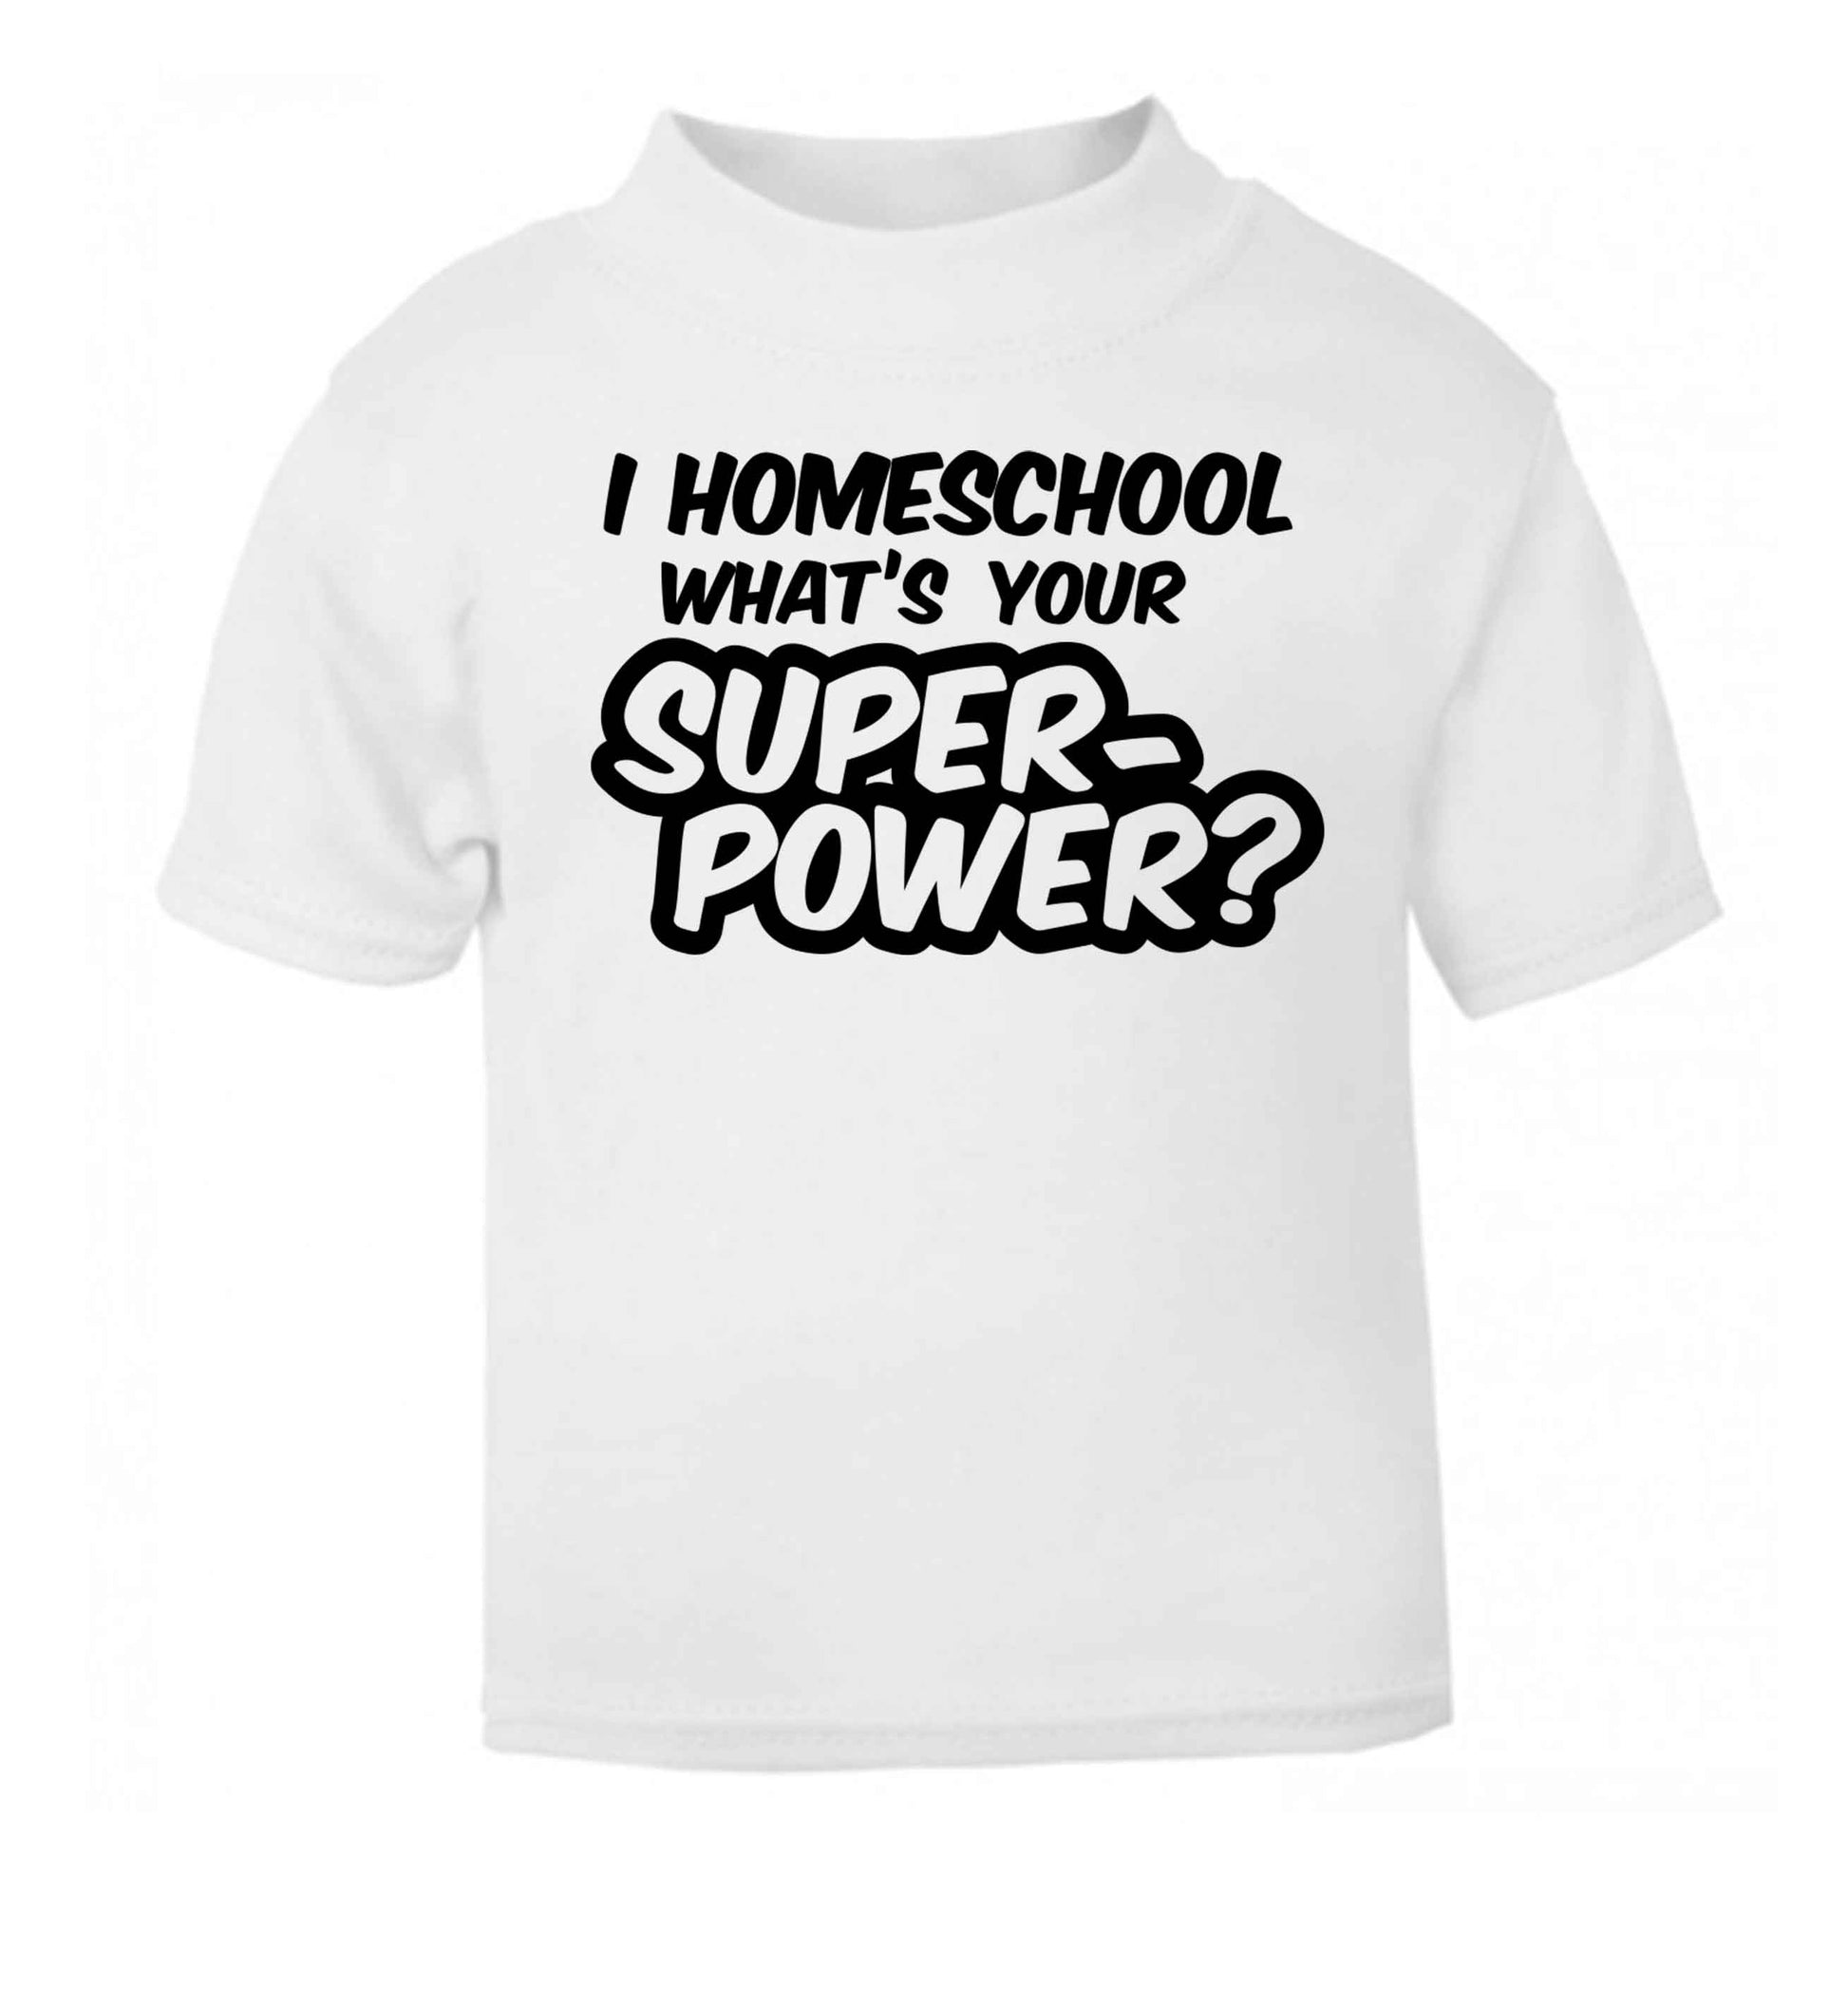 I homeschool what's your superpower? white Baby Toddler Tshirt 2 Years